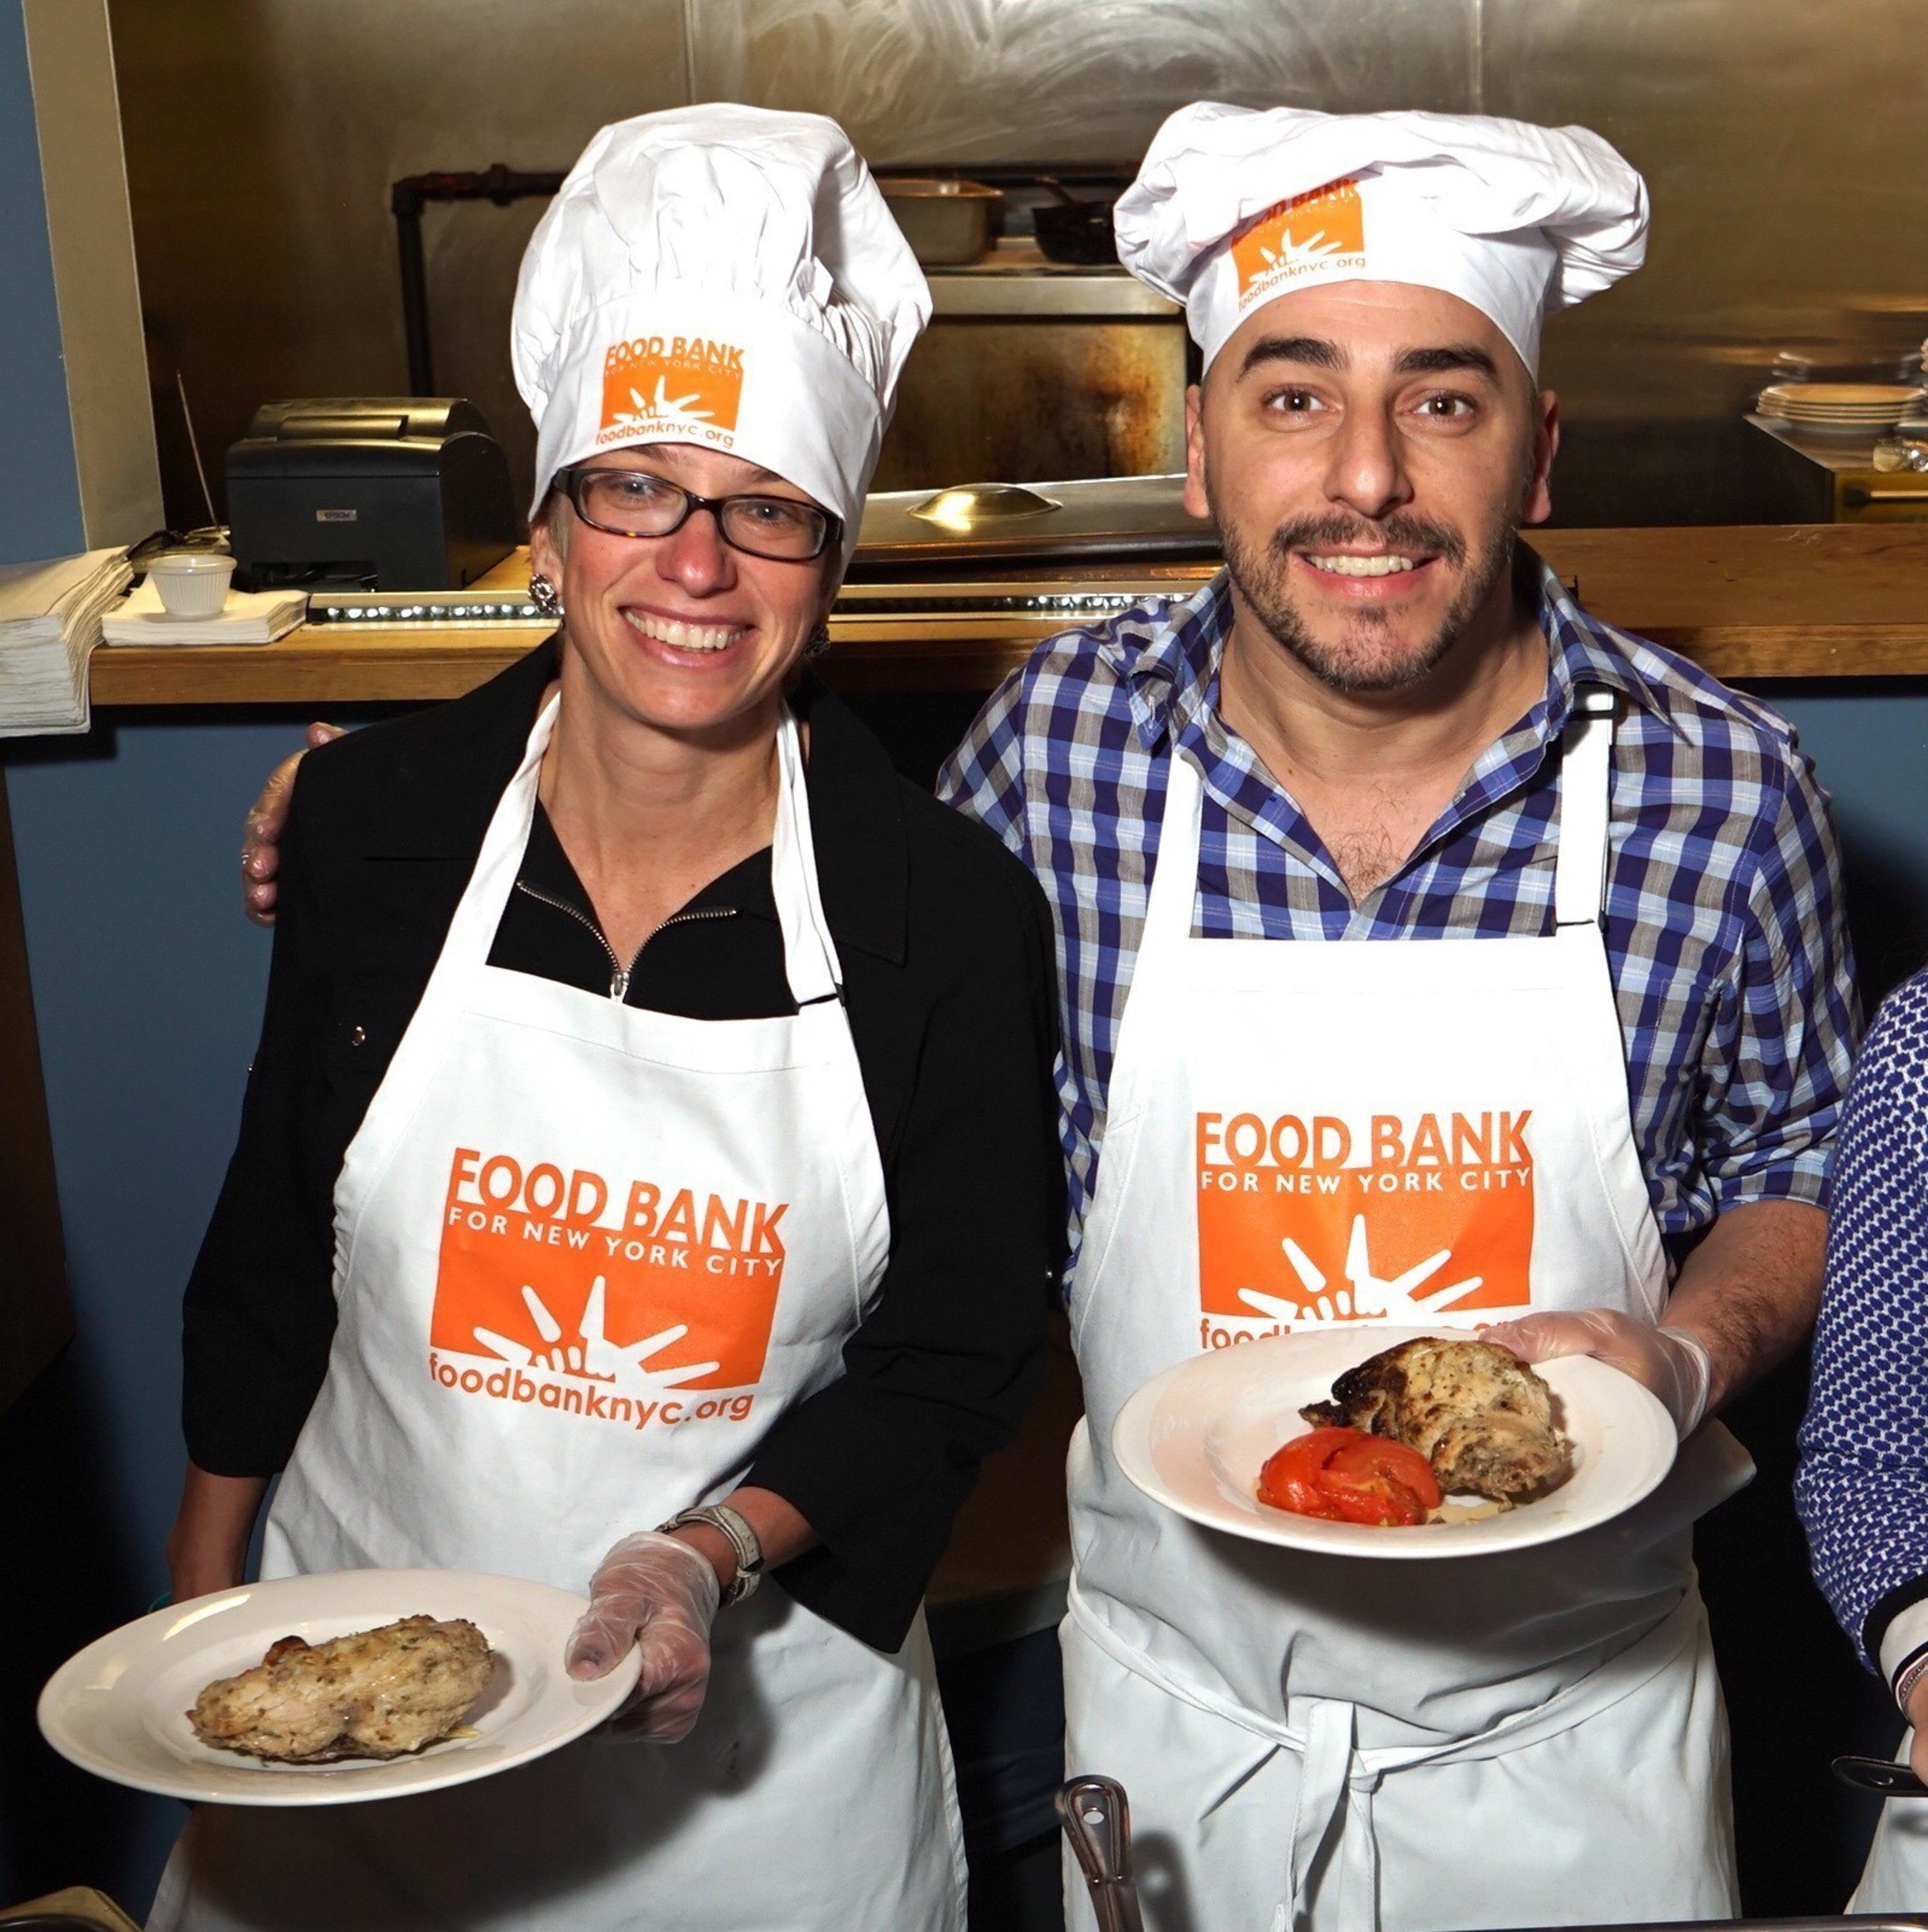 BBVA Compass ‎Chief Marketing and Client Experience Officer Jennifer Dominiquini and Chef Jordi prepare to serve 100 seniors at Food Bank for New York's West Harlem Community Kitchen.